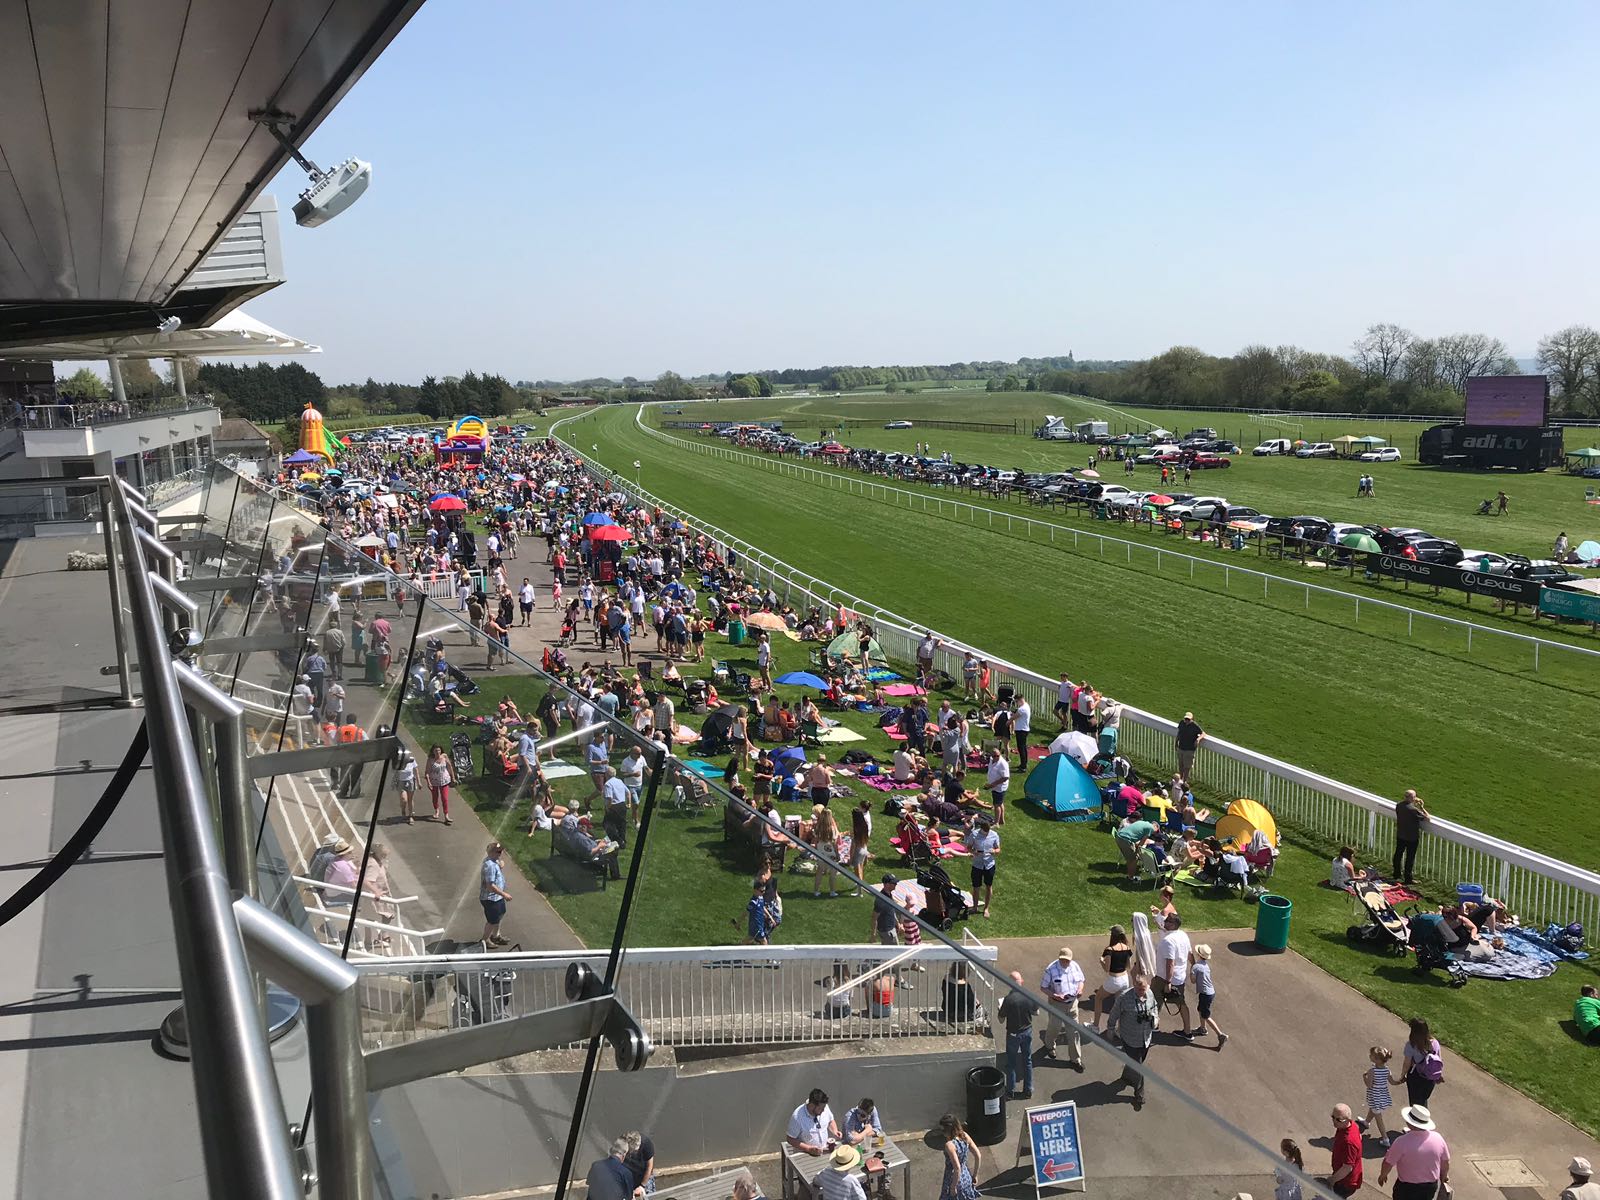 Snapped: Kids Takeover Day at Bath Racecourse